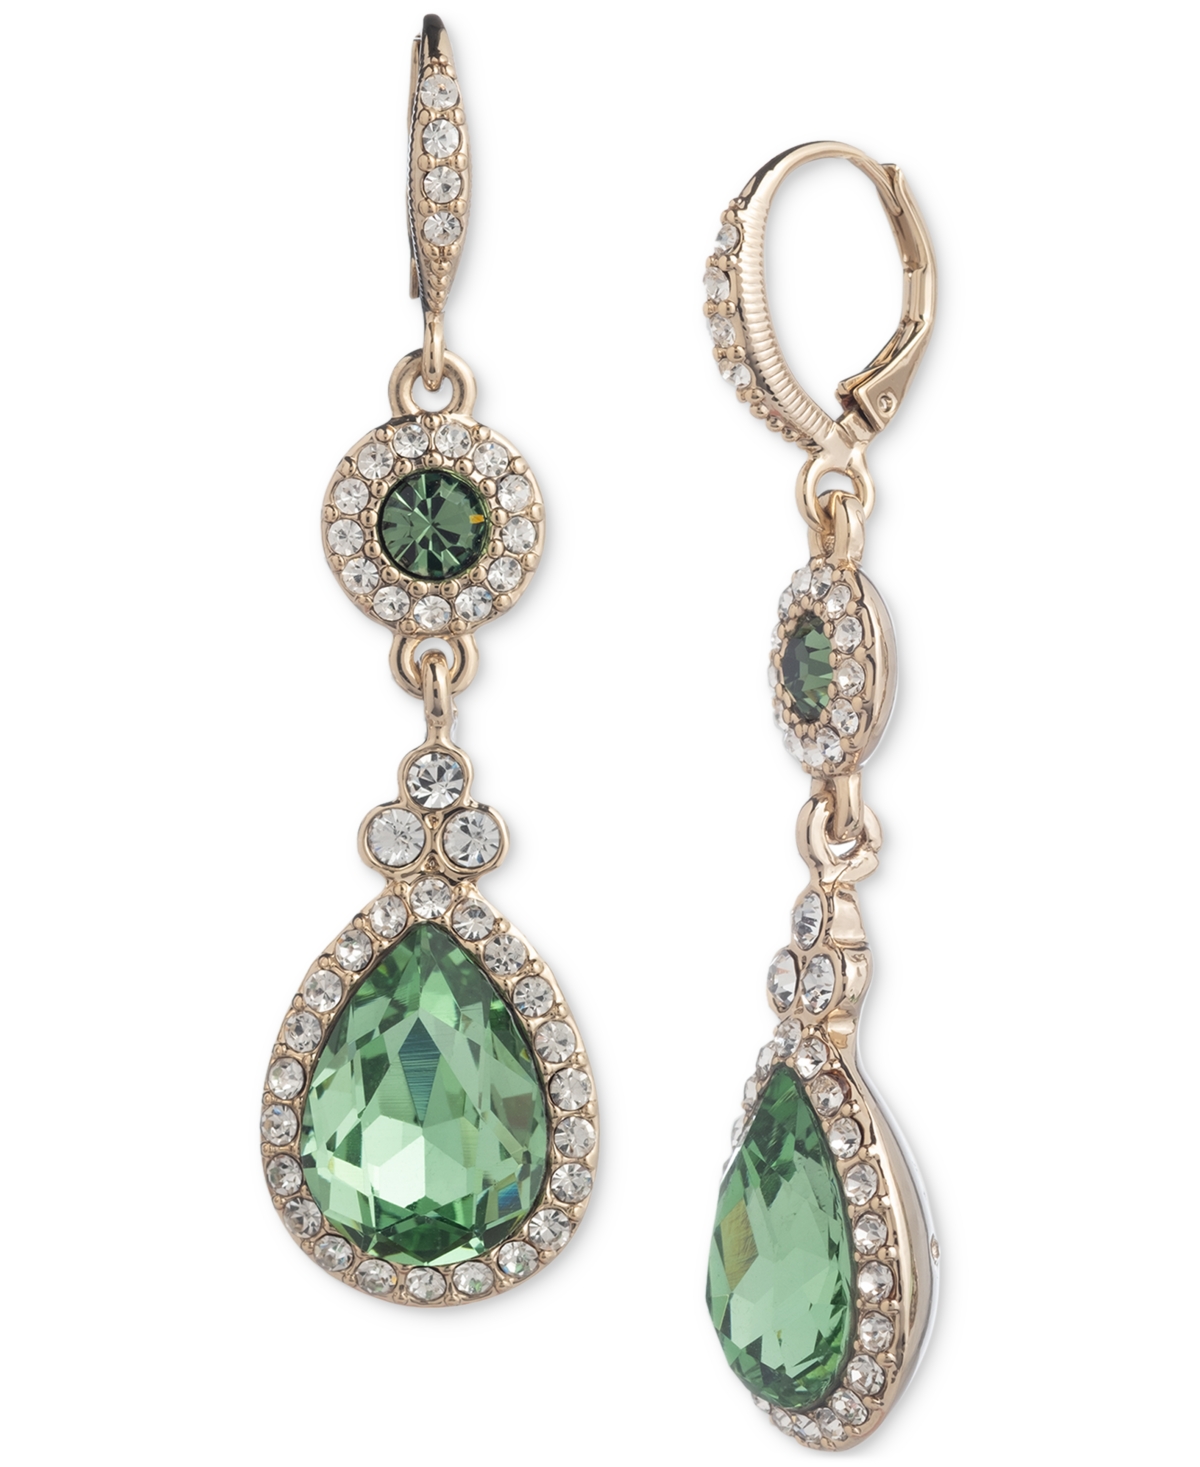 Gold-Tone Pave & Color Crystal Linear Drop Earrings - Lt/pas Grn